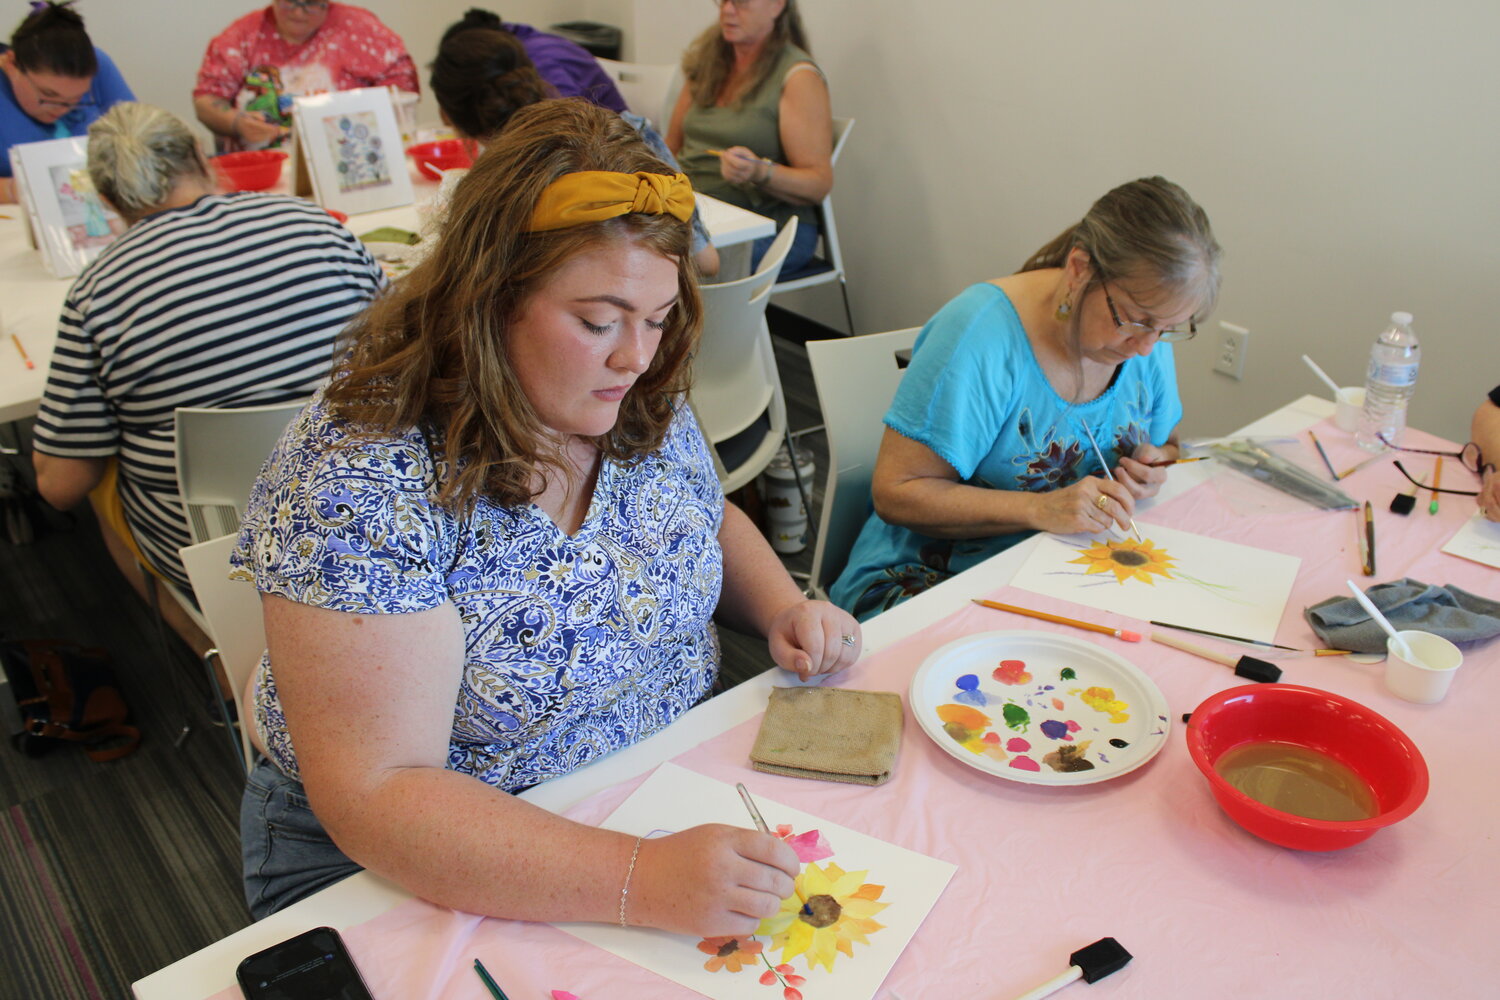 Abigail Schaefferkoetter and Cindy Trotter work on their watercolor paintings.